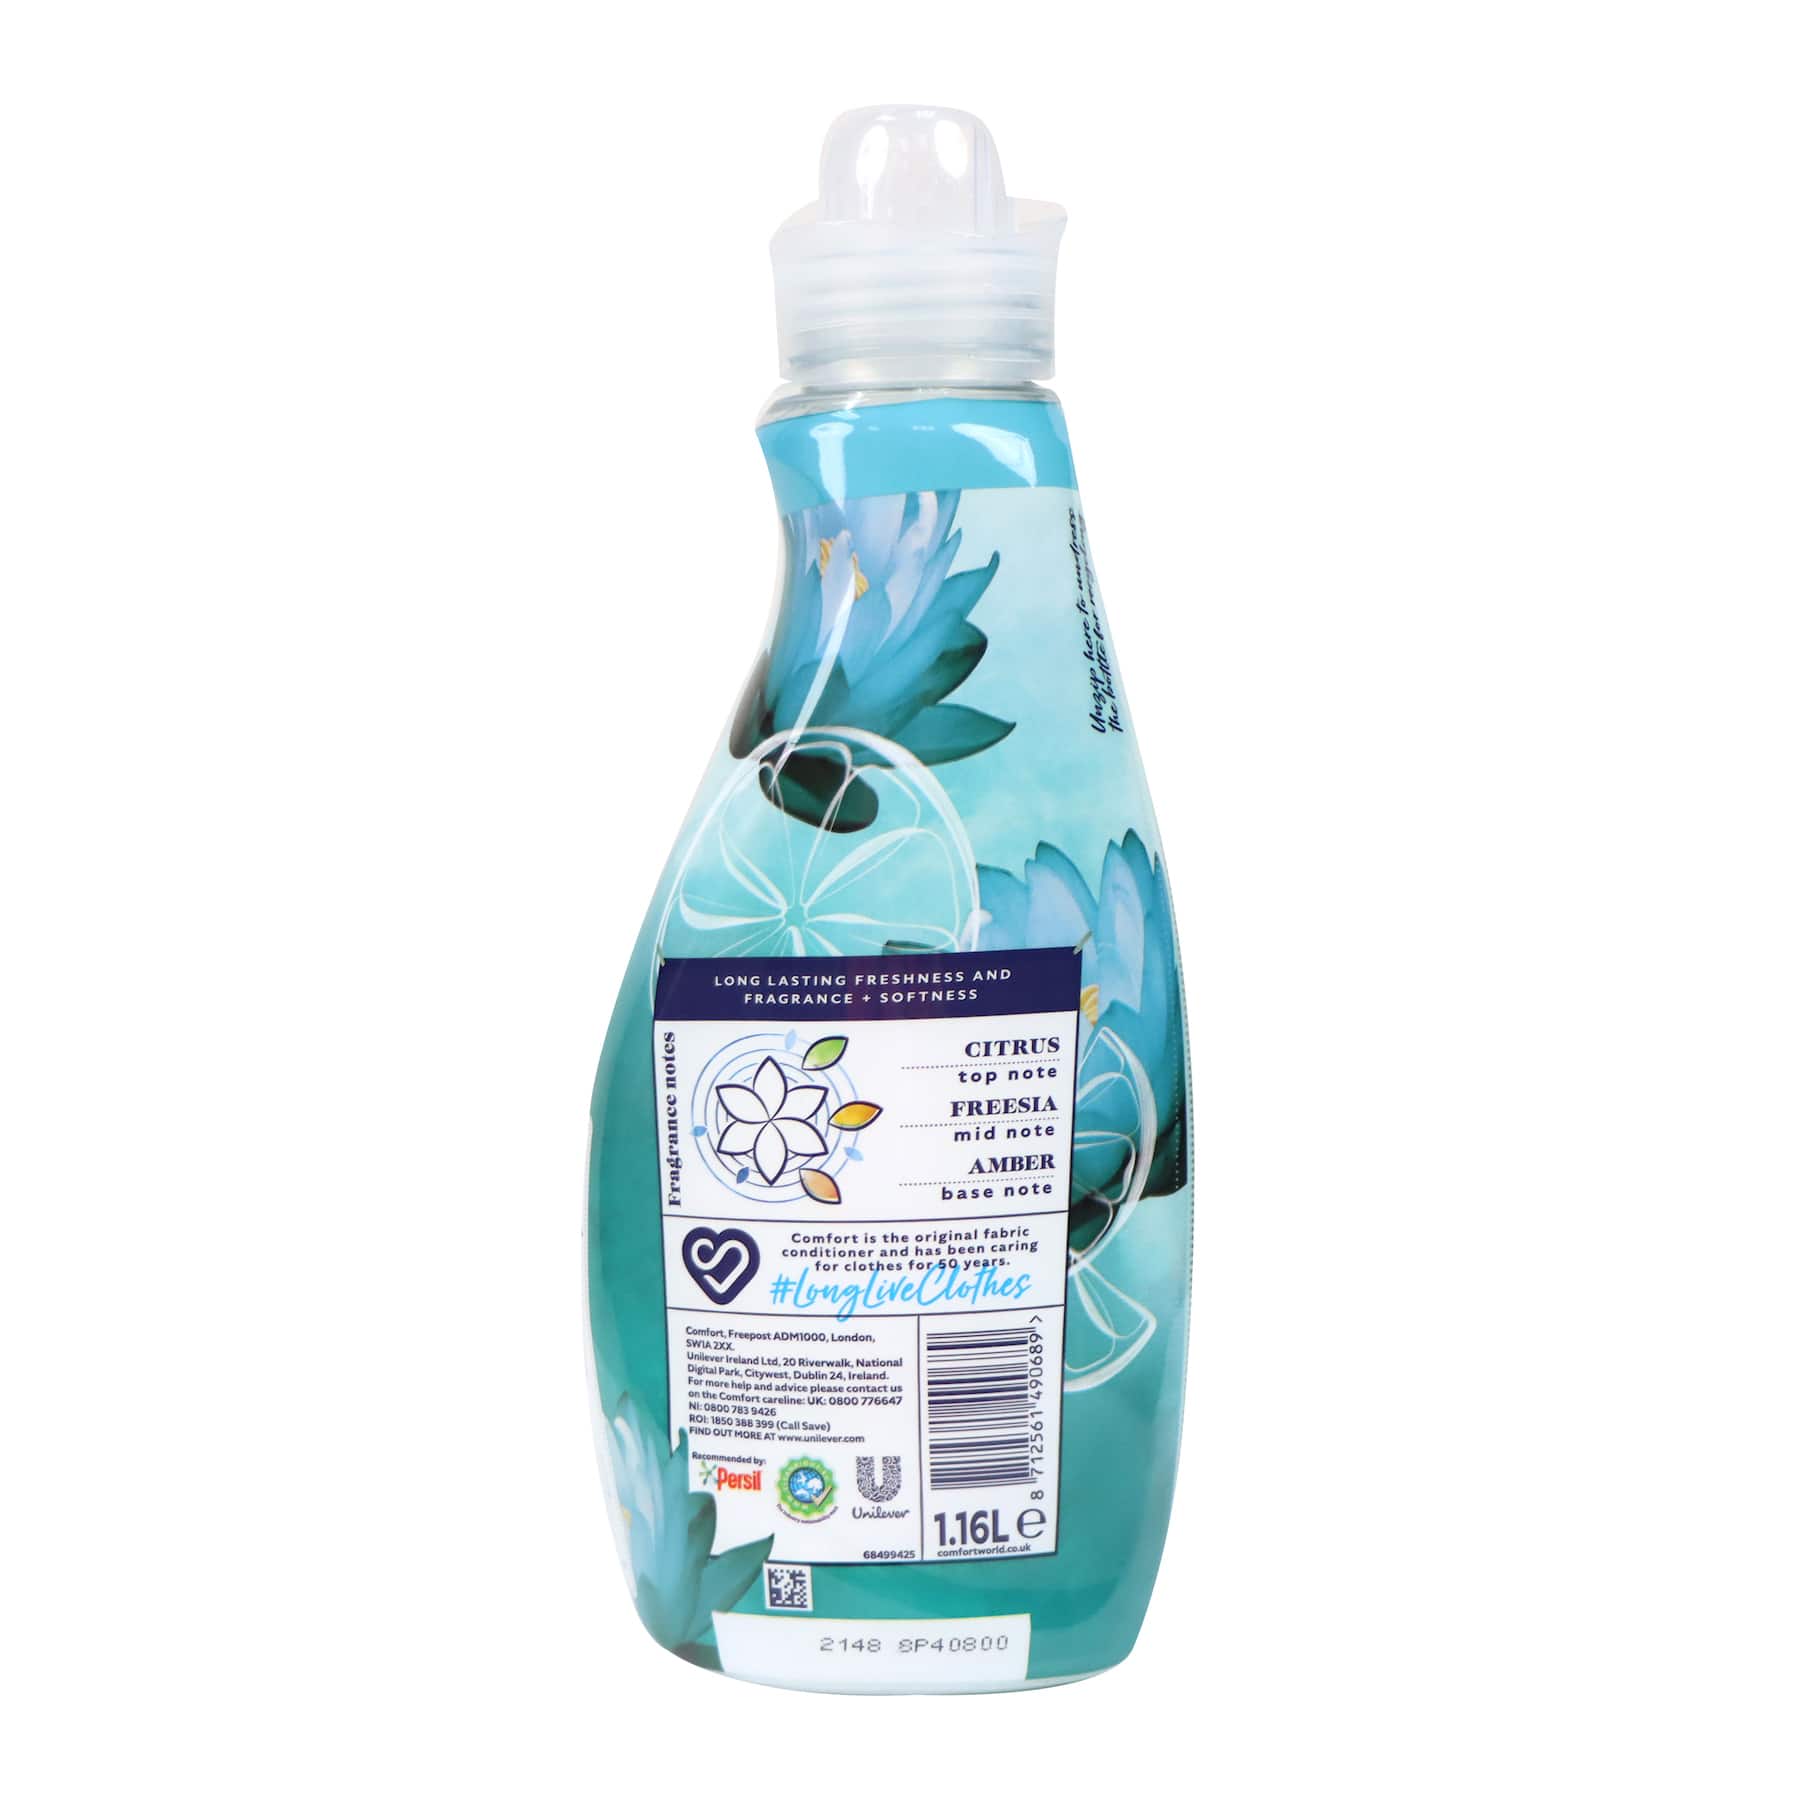 Comfort Fabric Conditioner 1.16L (Waterlily and Lime)